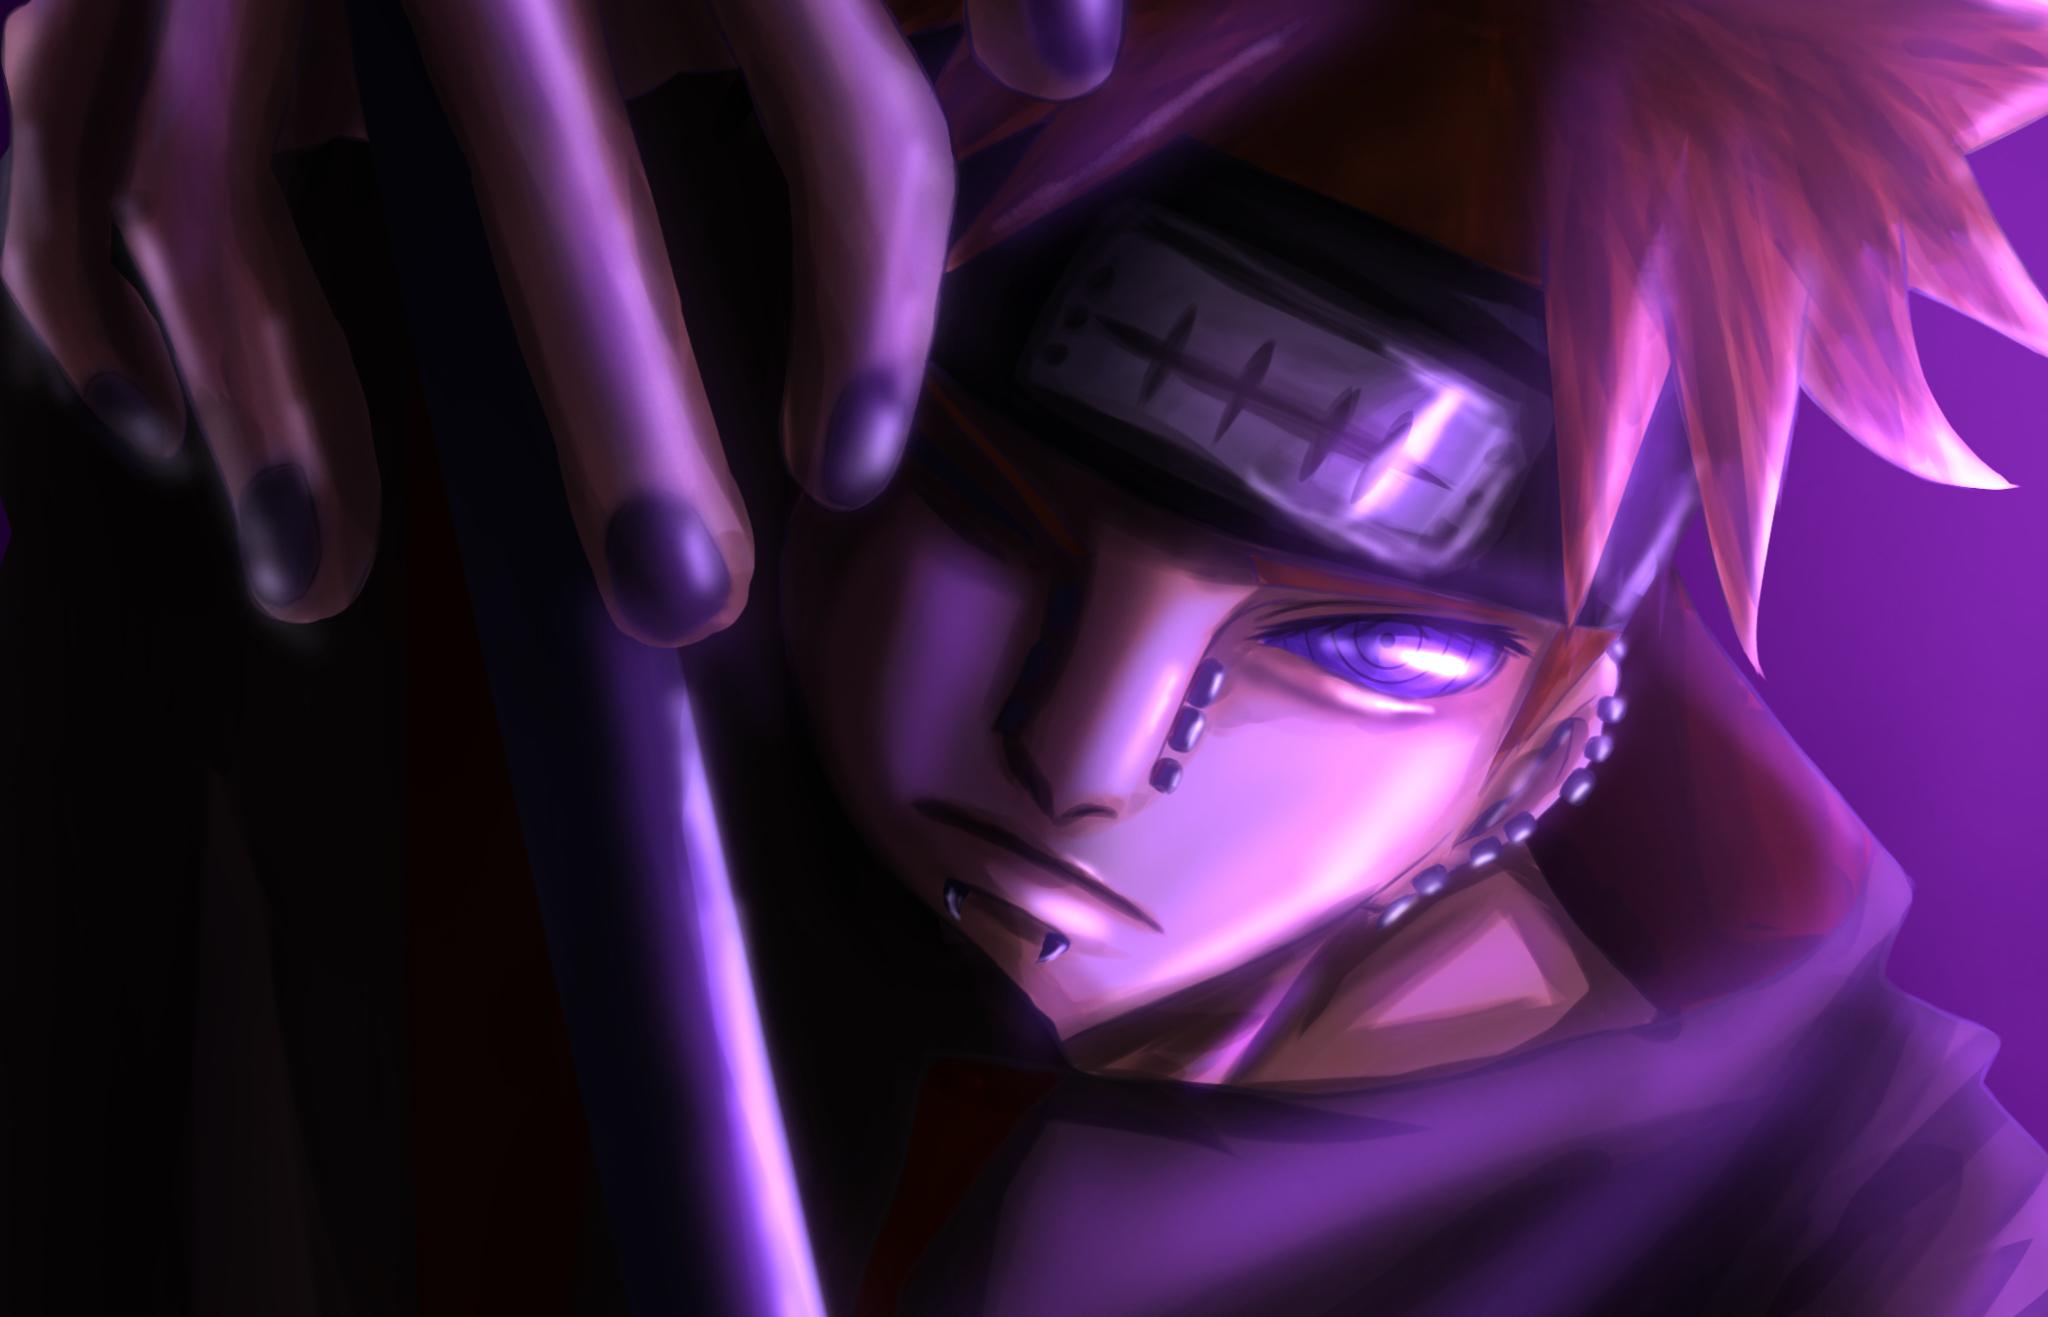 Pain Naruto HD Wallpaper And Background